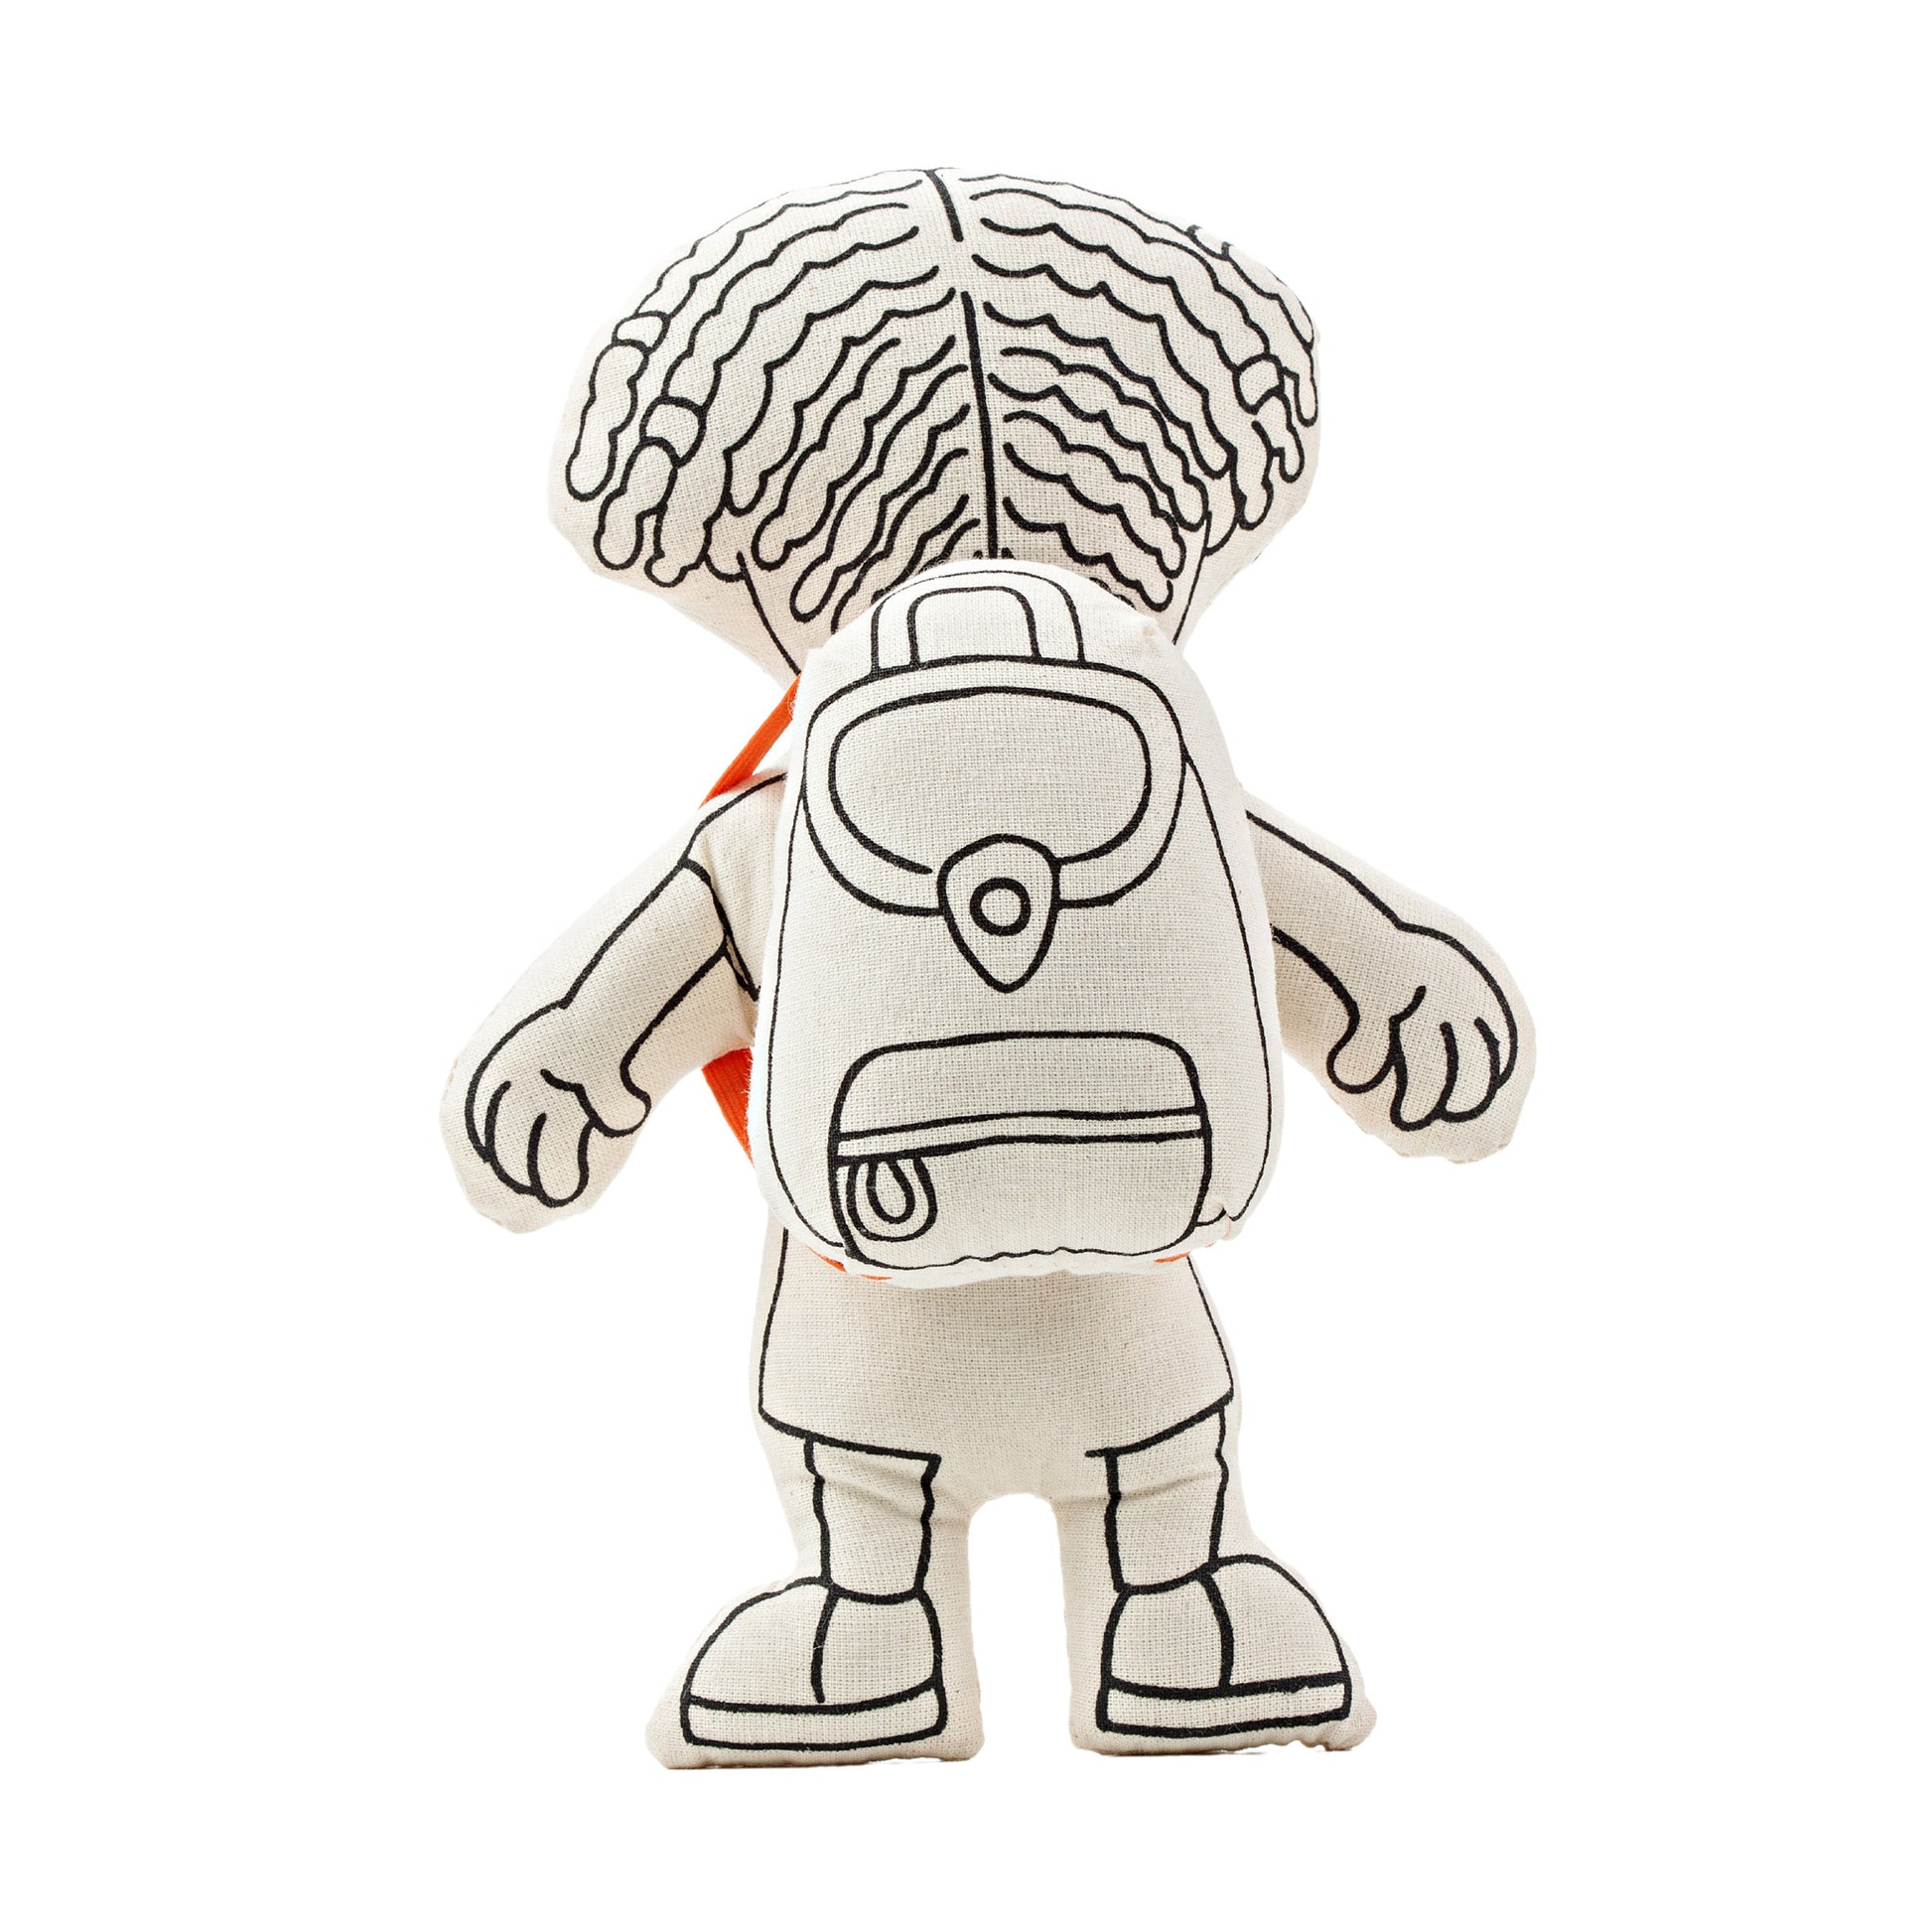 Doll for coloring - Gender Neutral - Kid with Locks